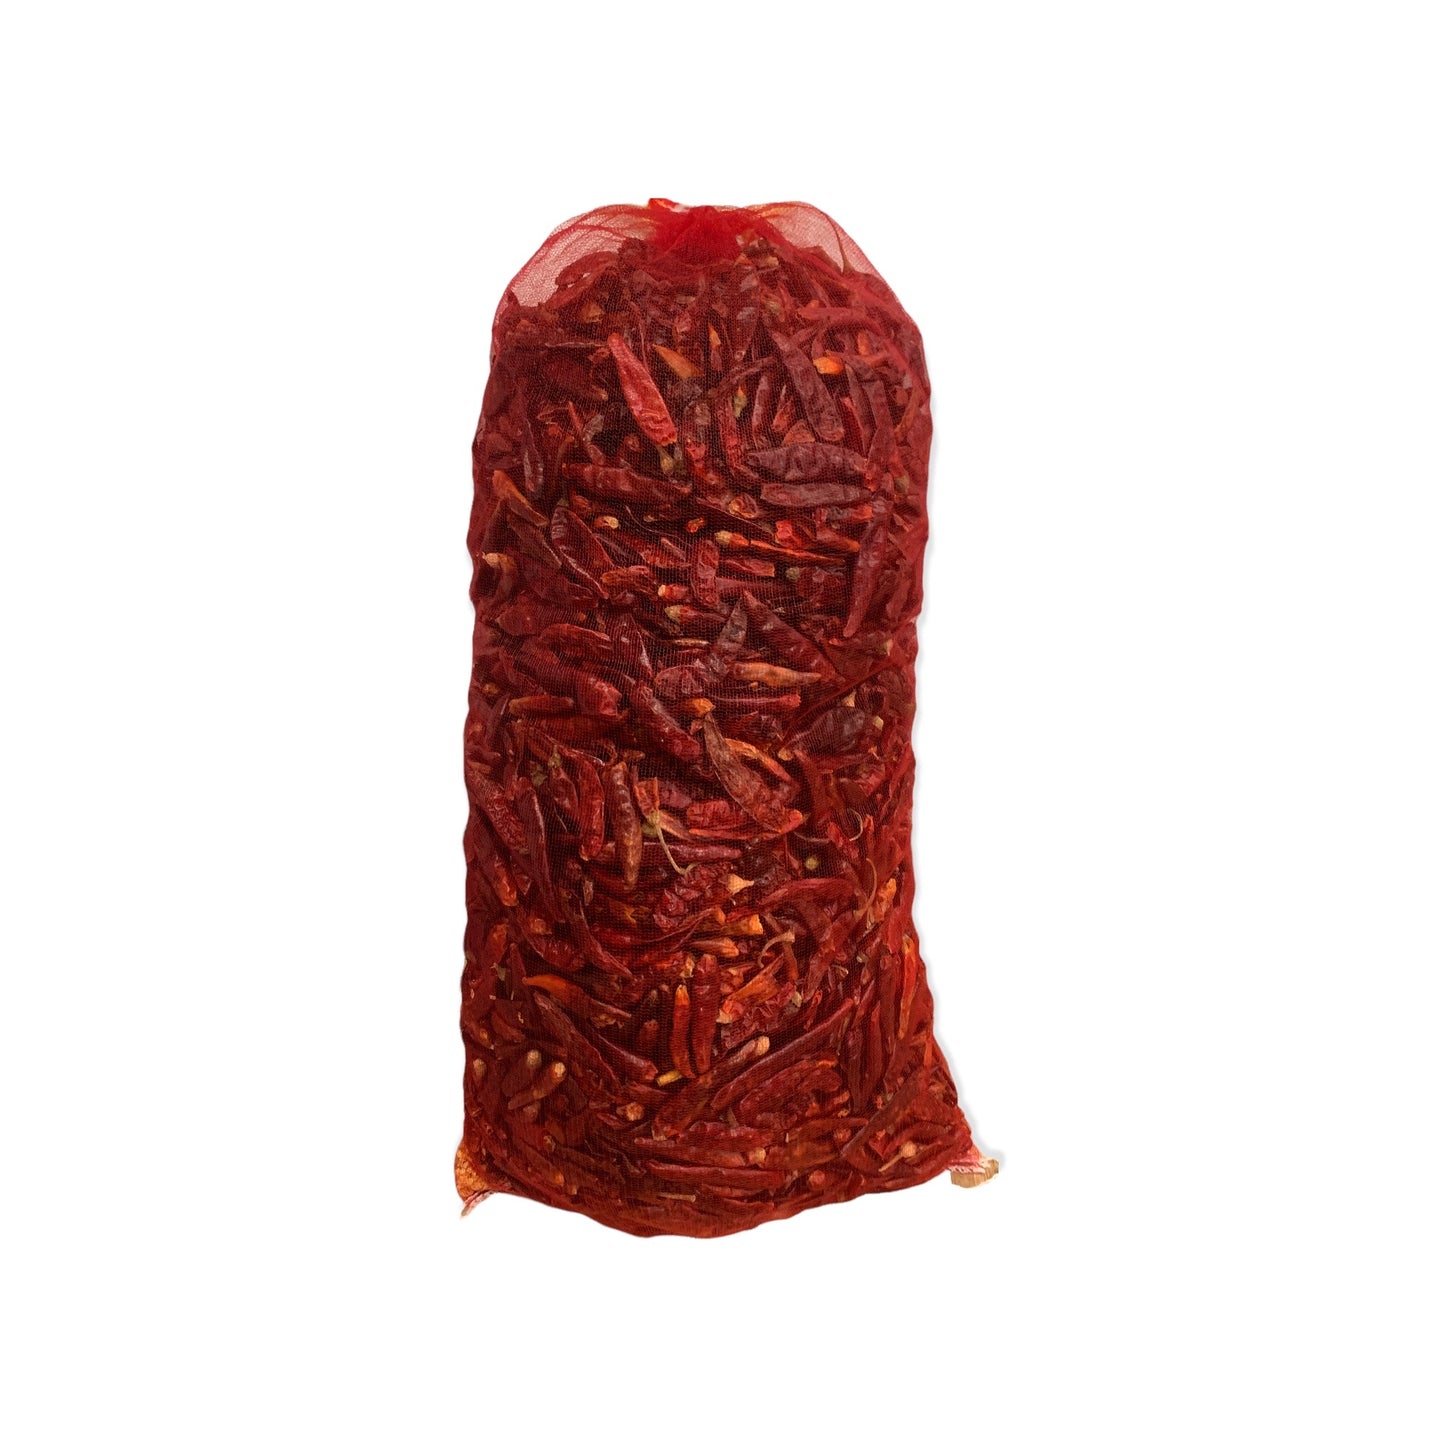 #8006-5lb Dried Whole Chiles Pepper